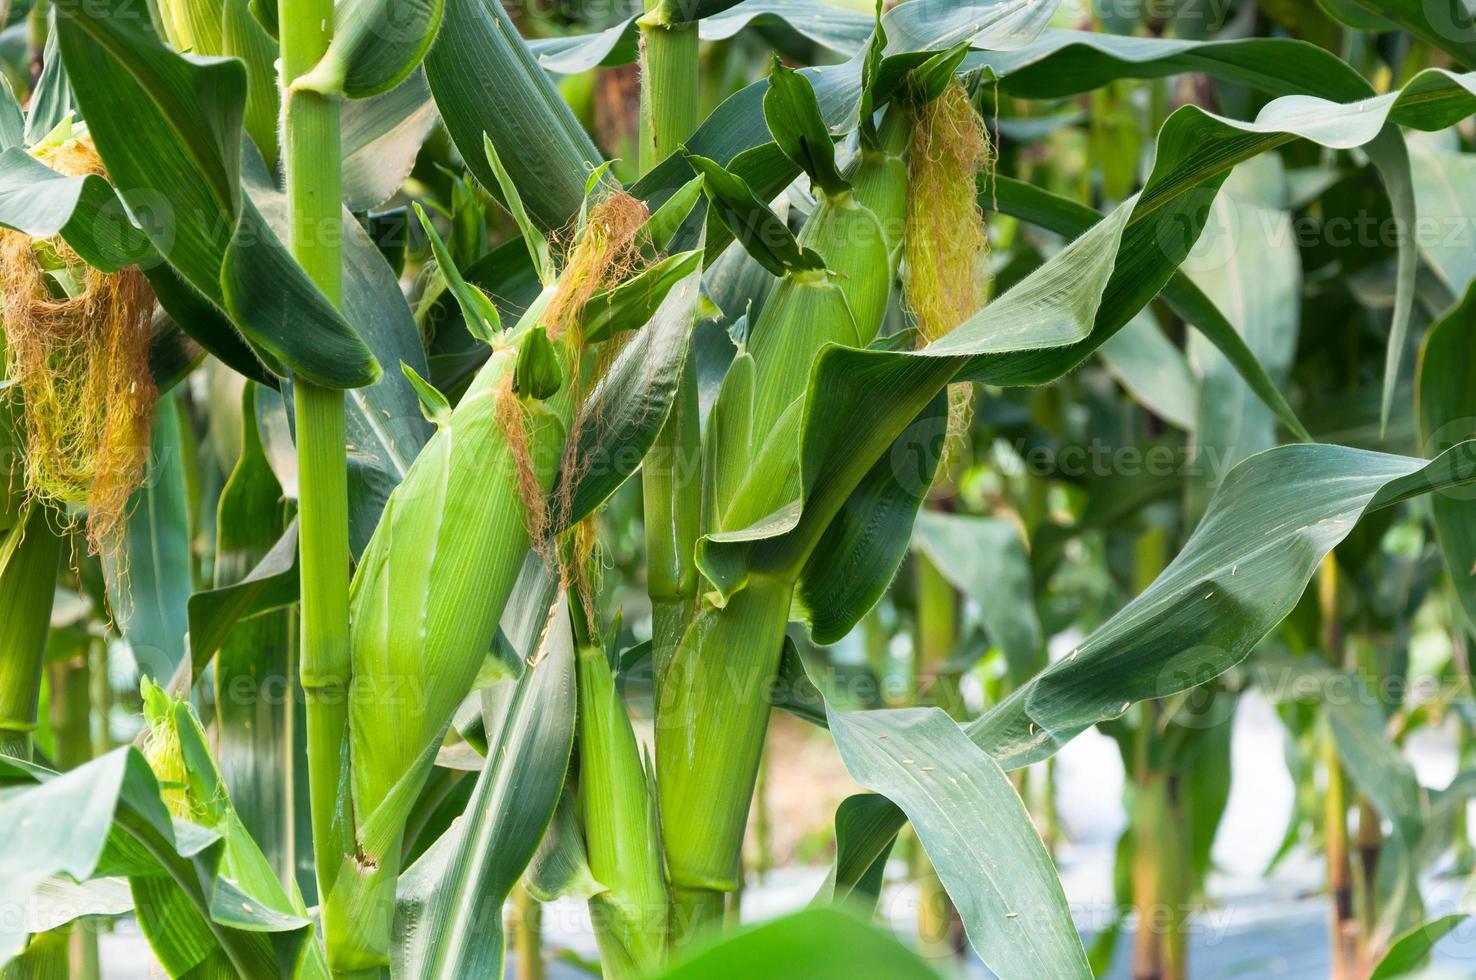 Close up of fresh corn plants with corn field,green corn in field agriculture,corn cobs on stalks in farm field photo